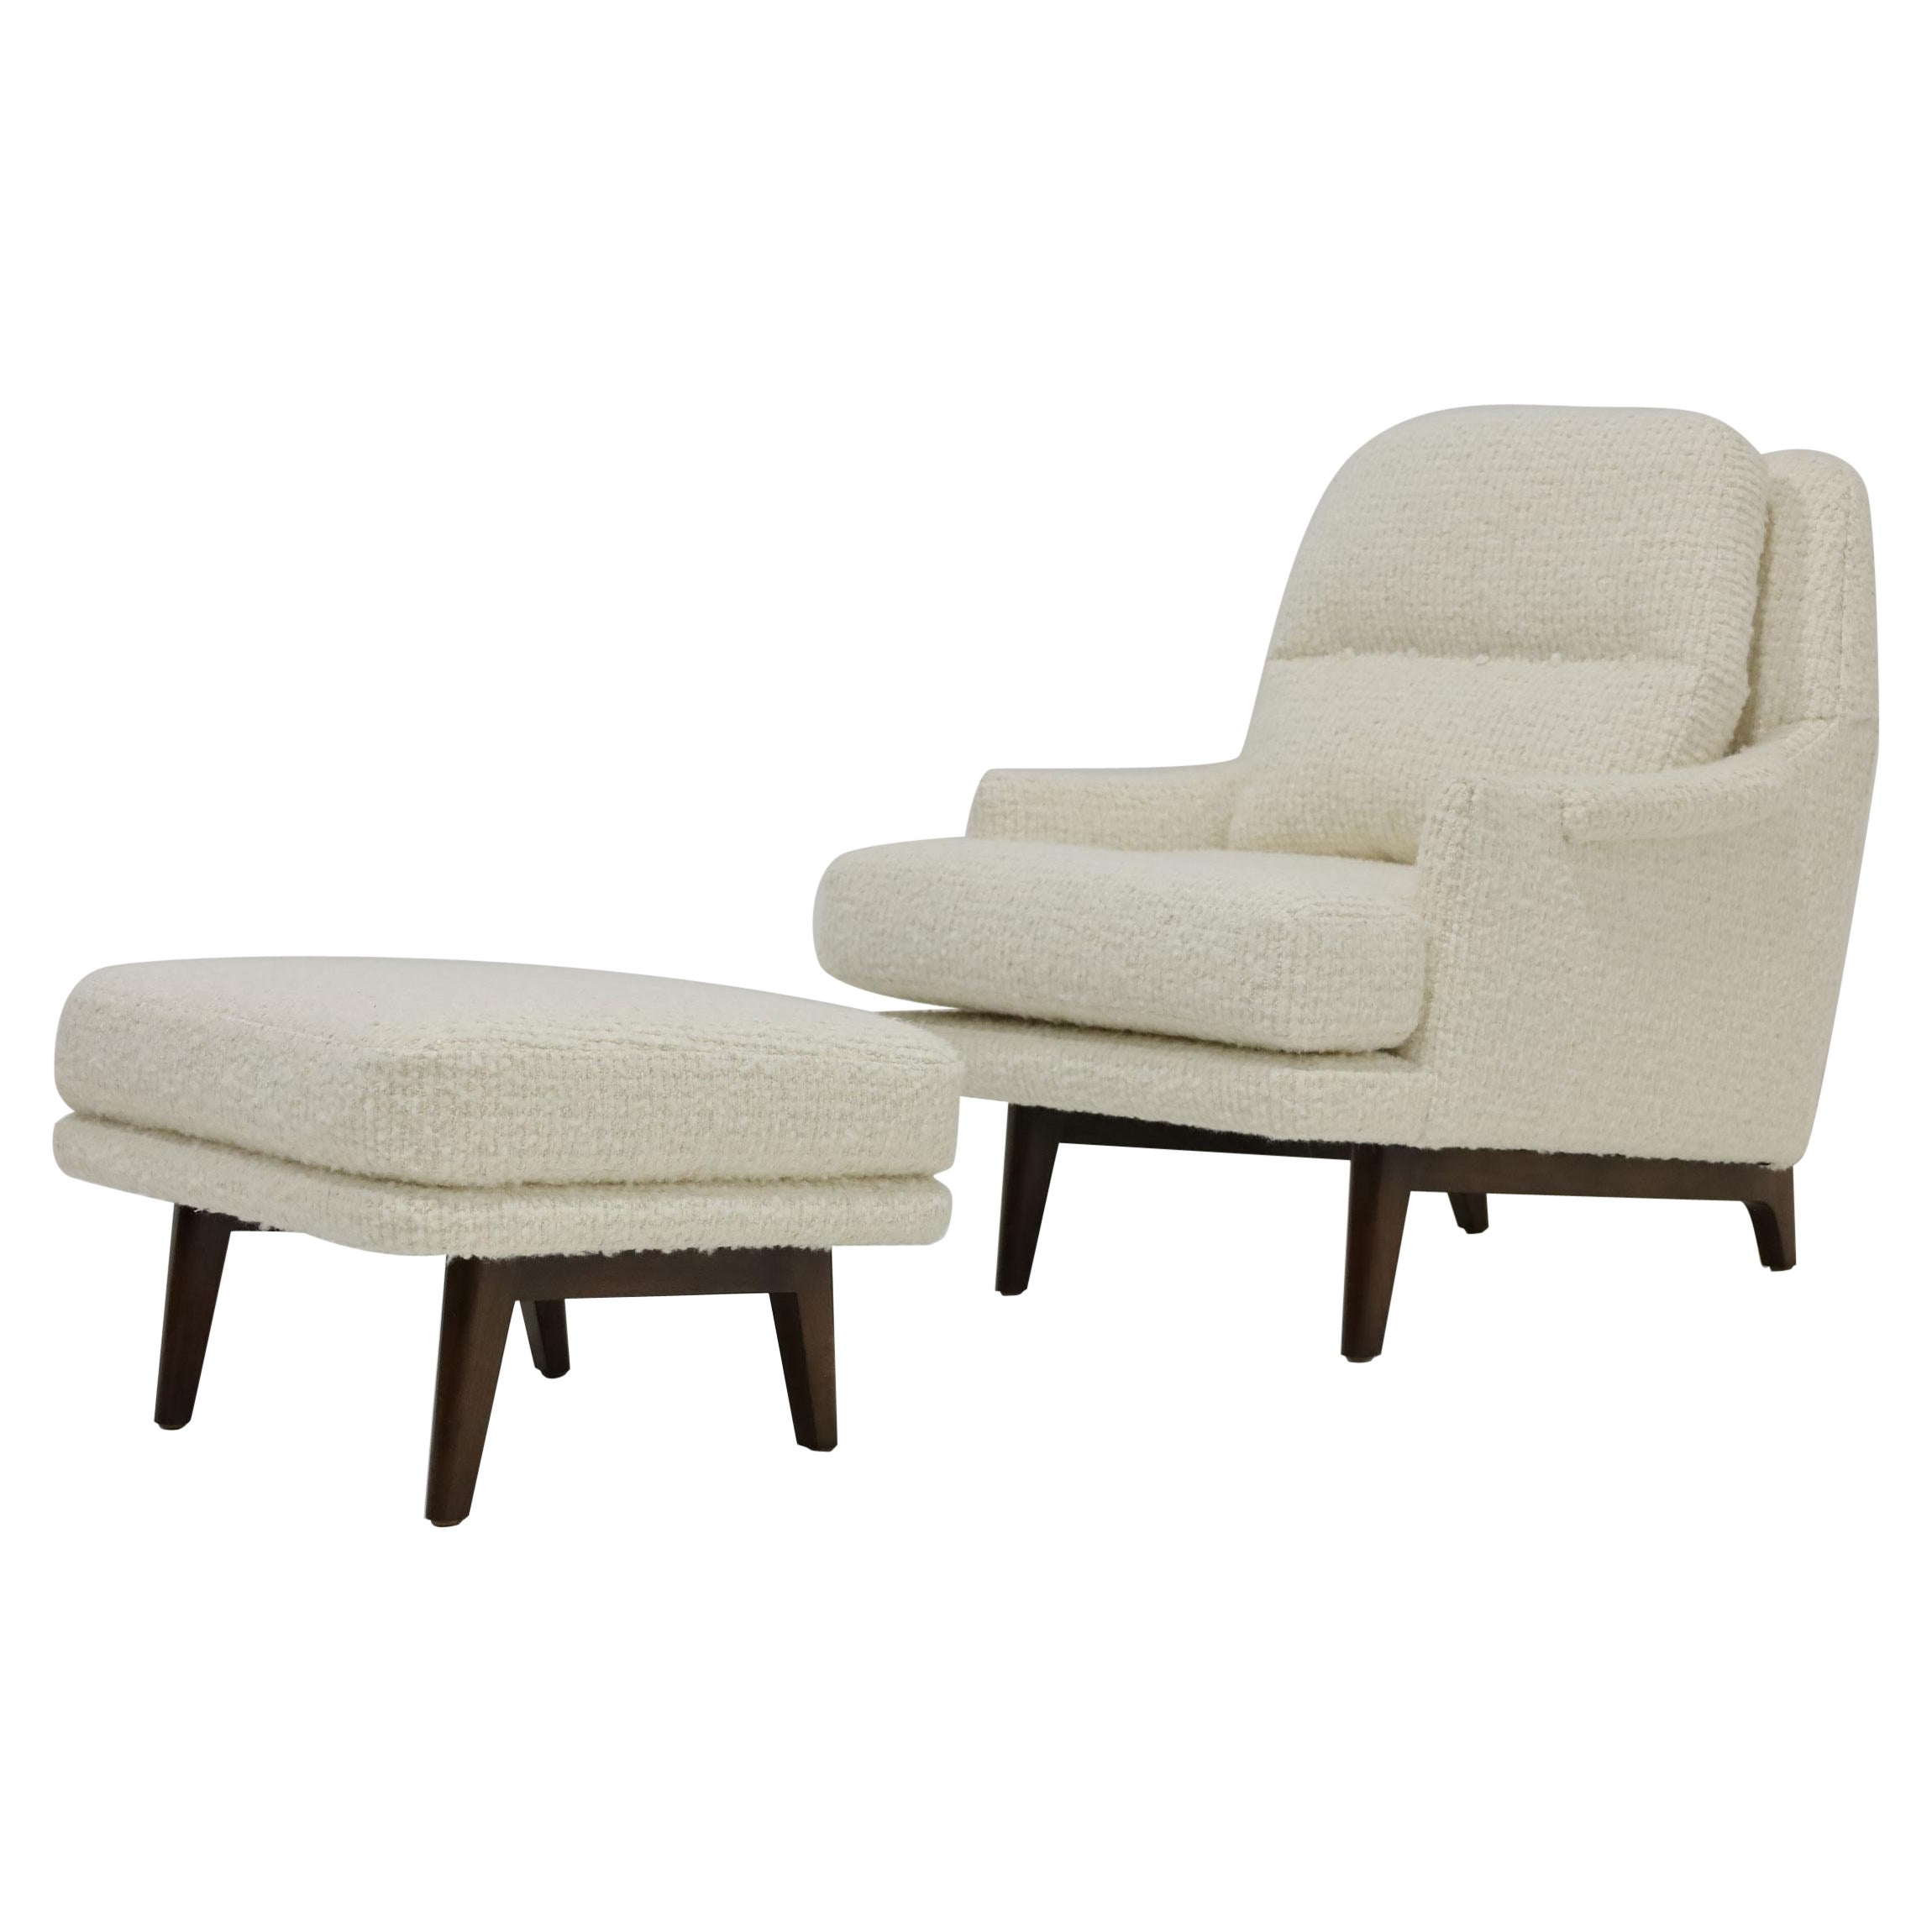 Roger Sprunger Lounge Chairs